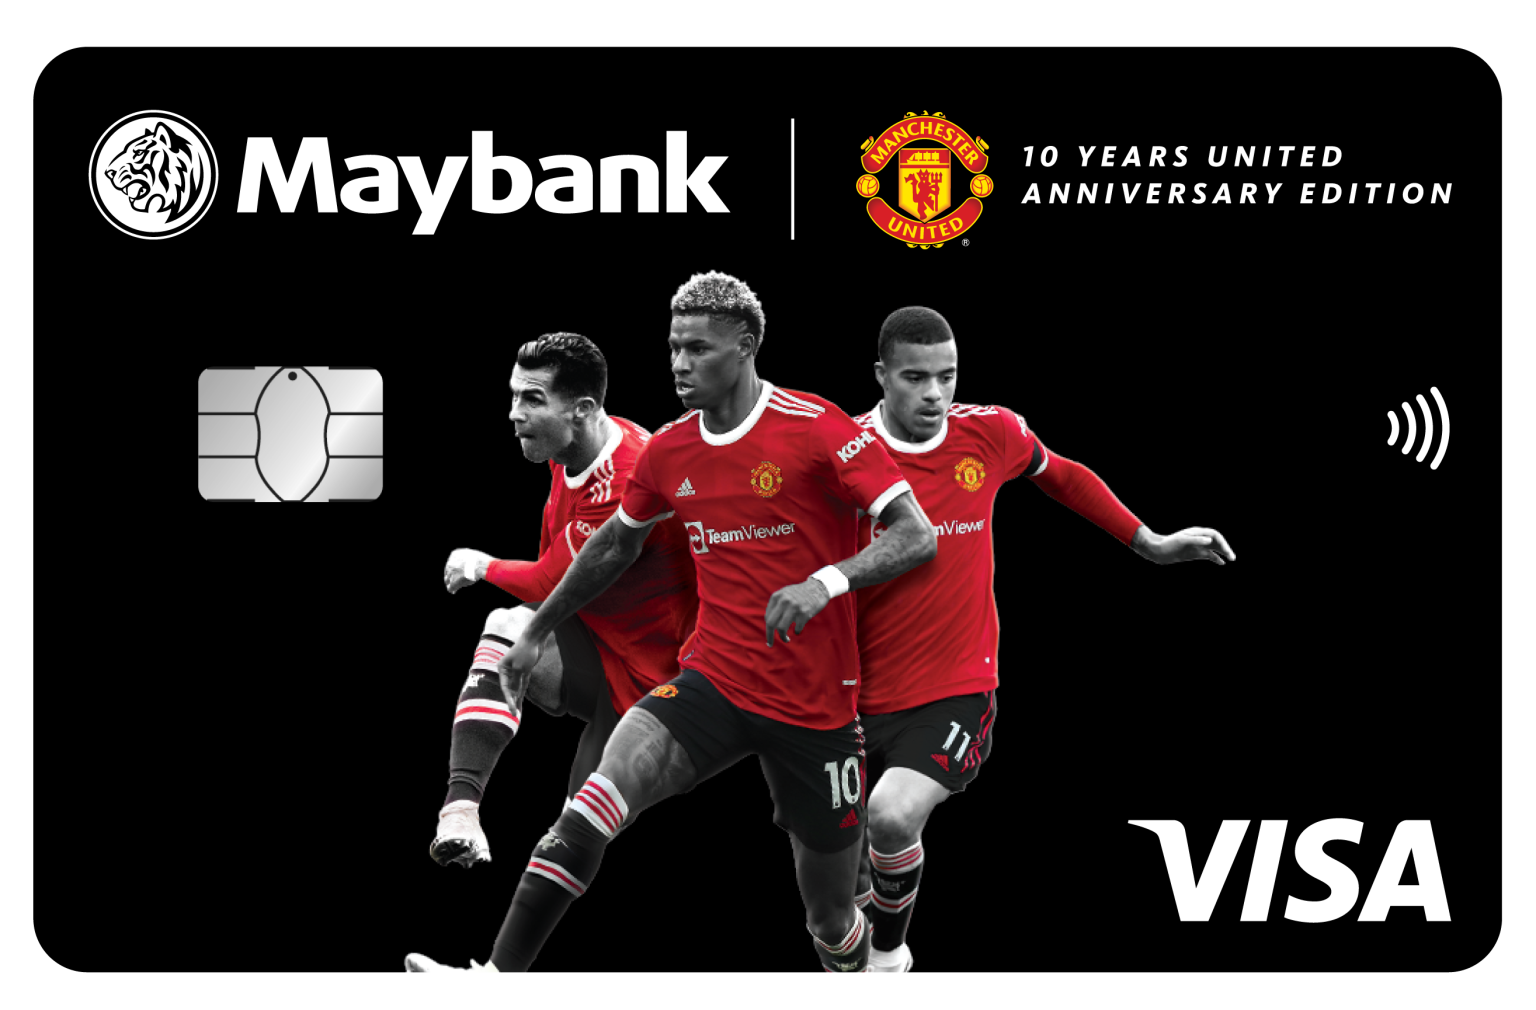 Maybank and Man U commemorate a decade of partnership with limited